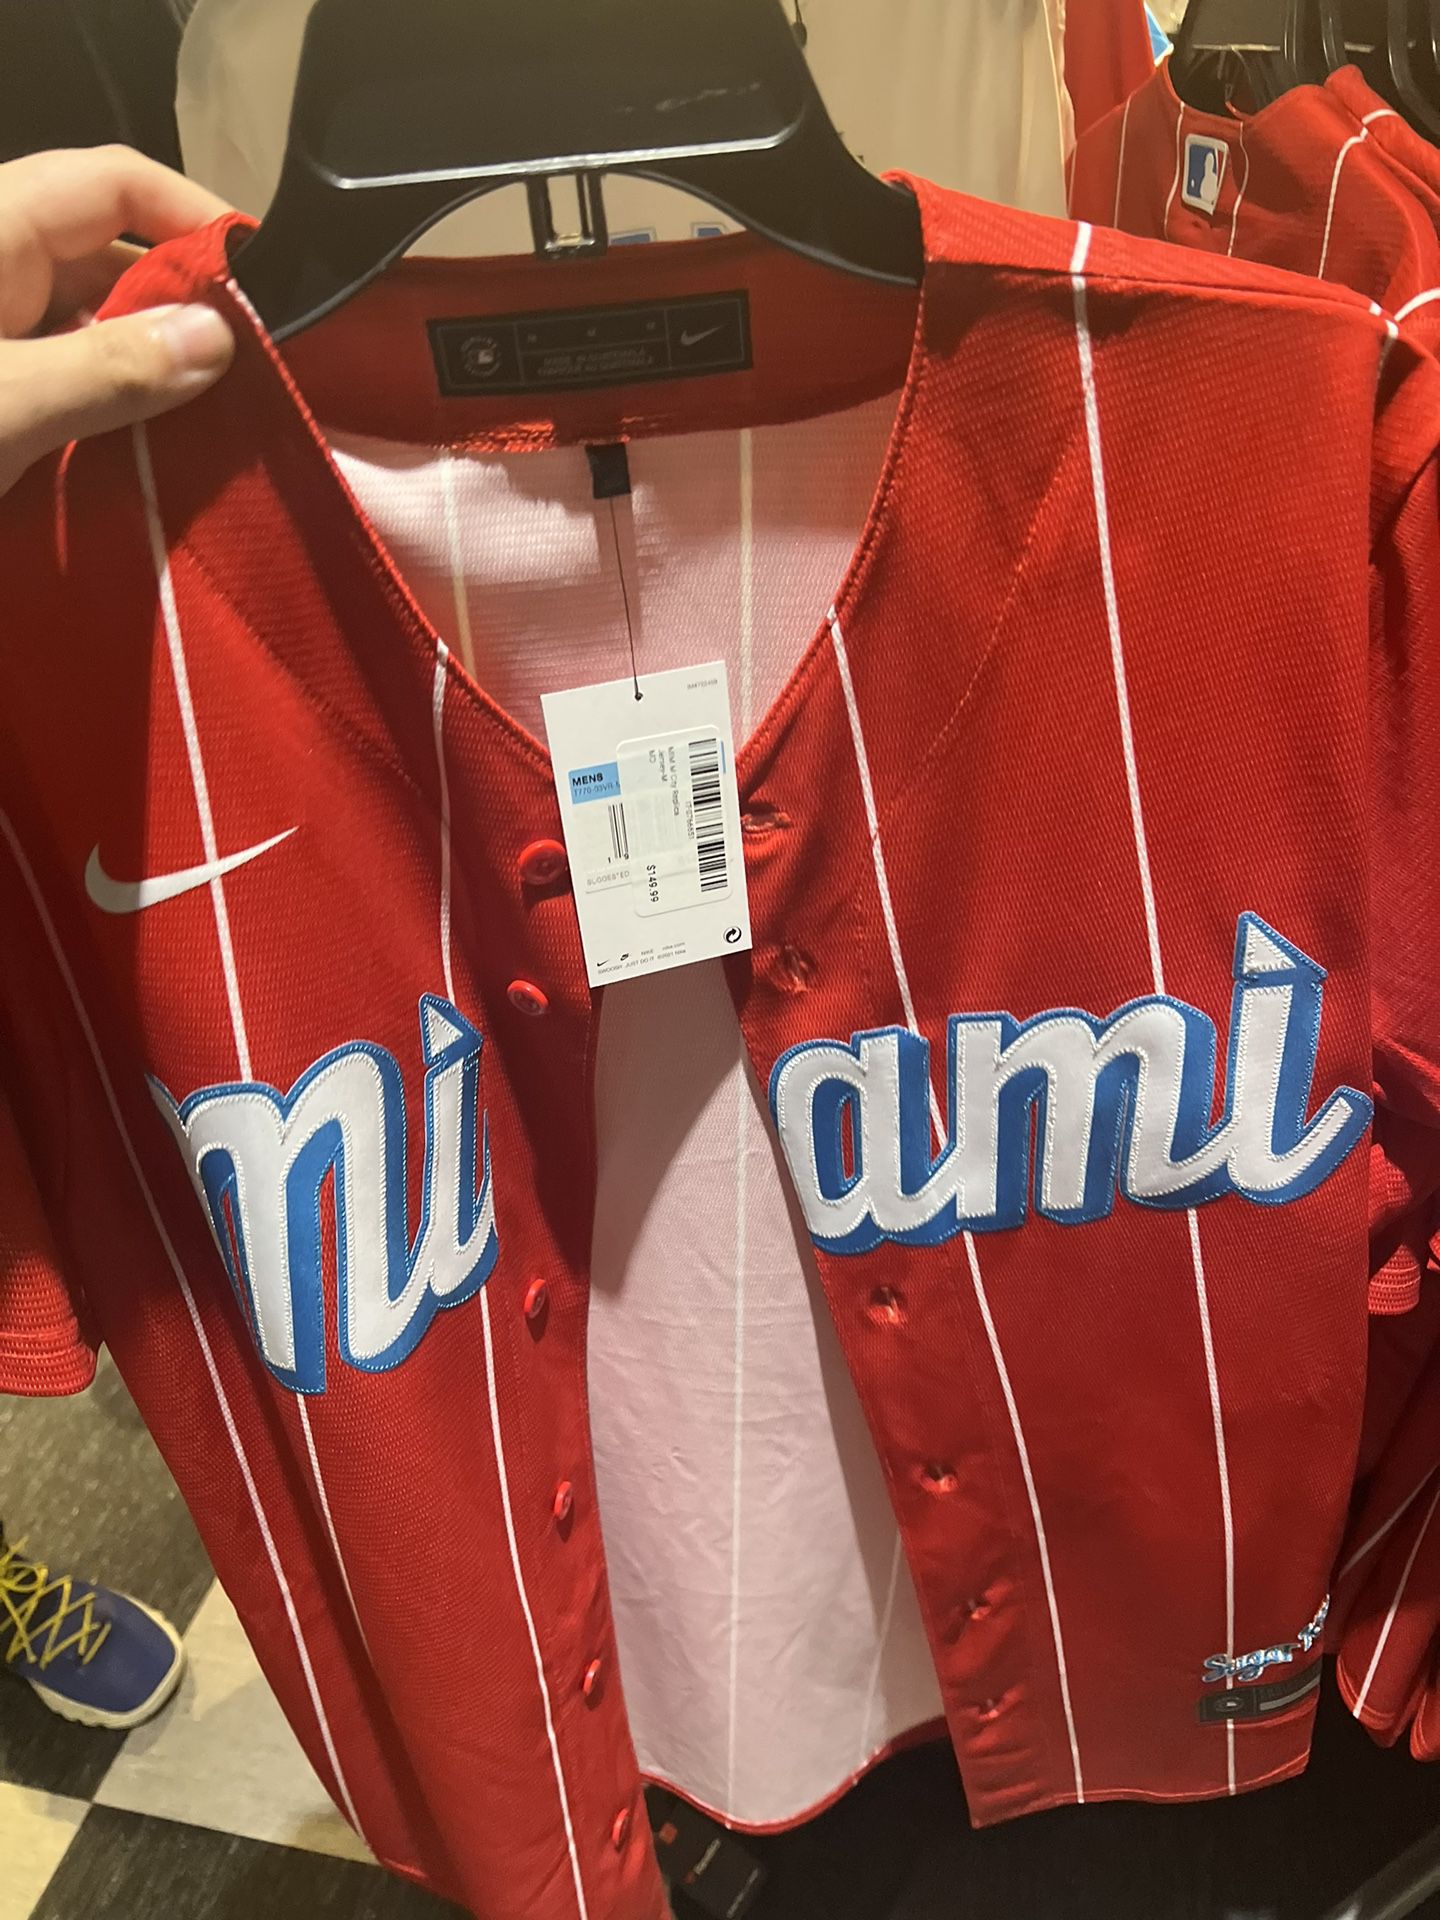 Official Marlins City Connect Jerseys, Miami Marlins City Connect  Collection, Marlins City Connect Series